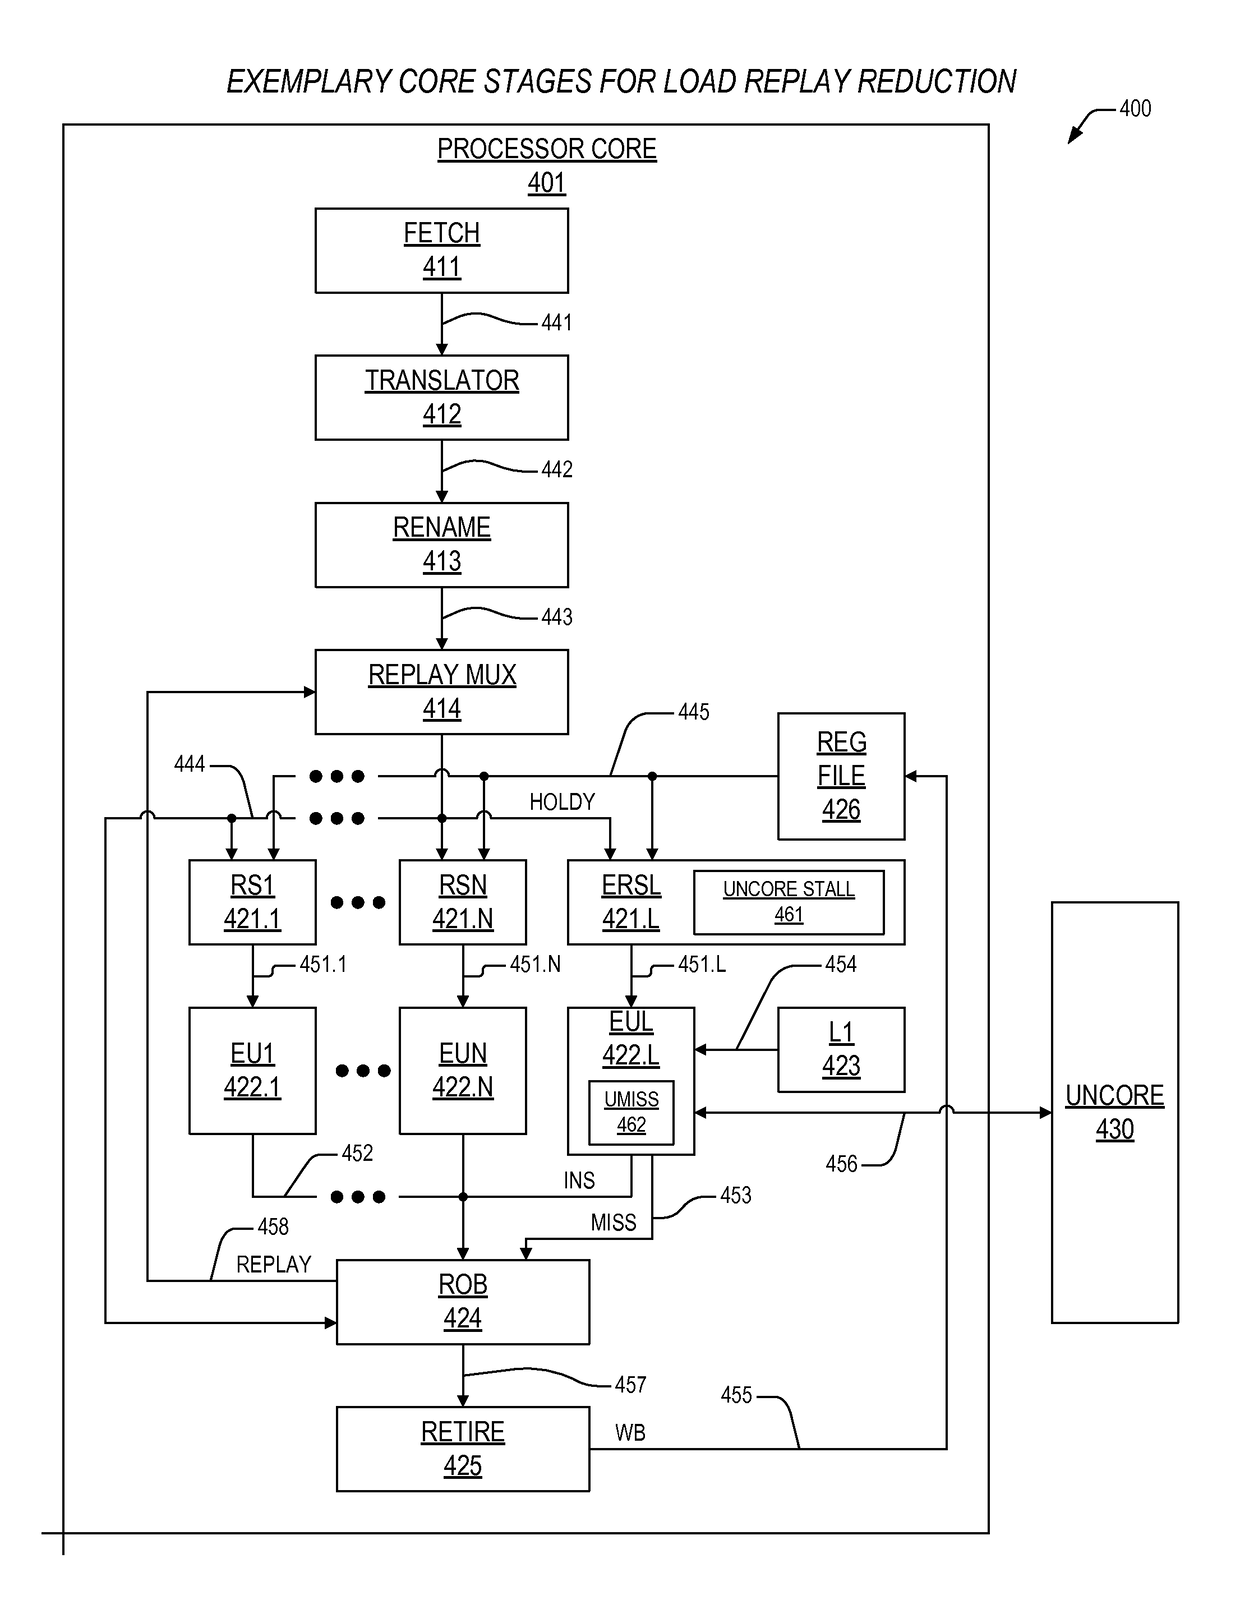 Mechanism to preclude load replays dependent on fuse array access in an out-of-order processor